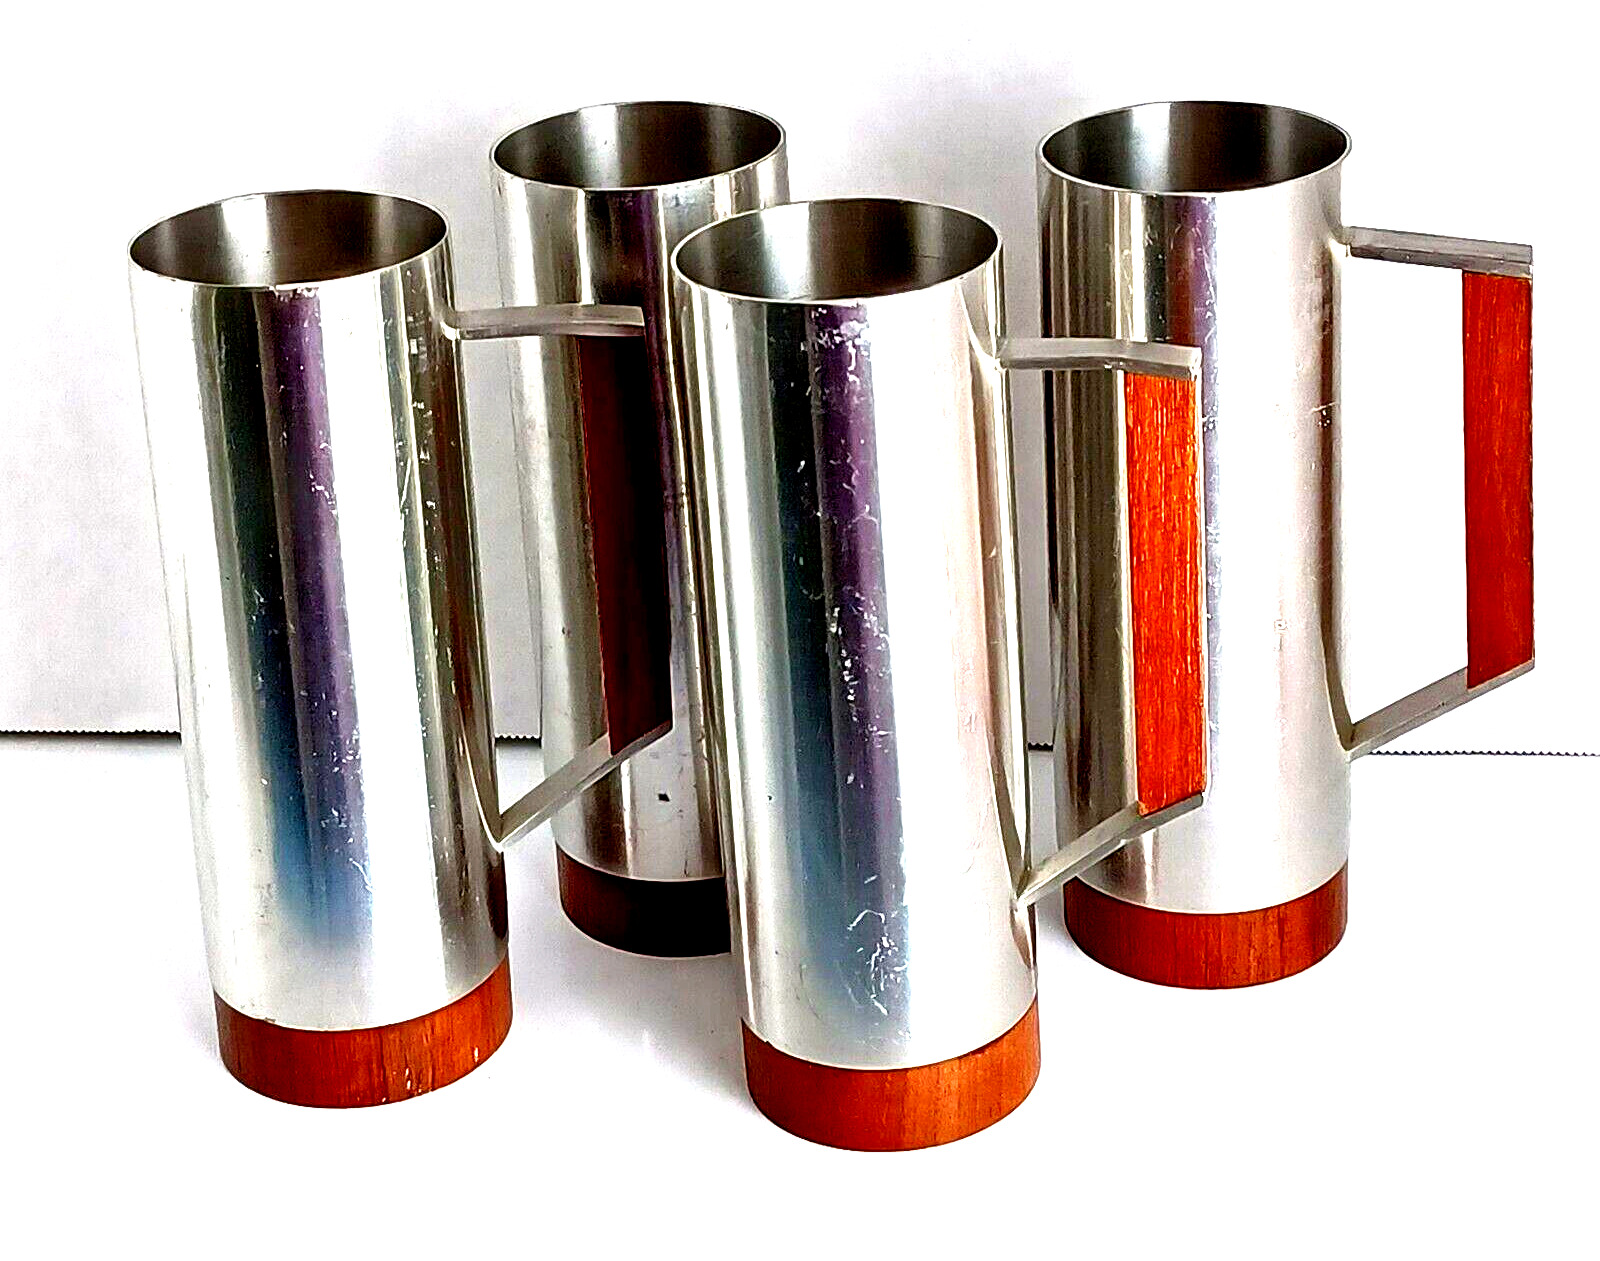 1946-49 Vintage Siam Pewter Mugs Cups Teak Wood Handles Lot of Four Tall Thin